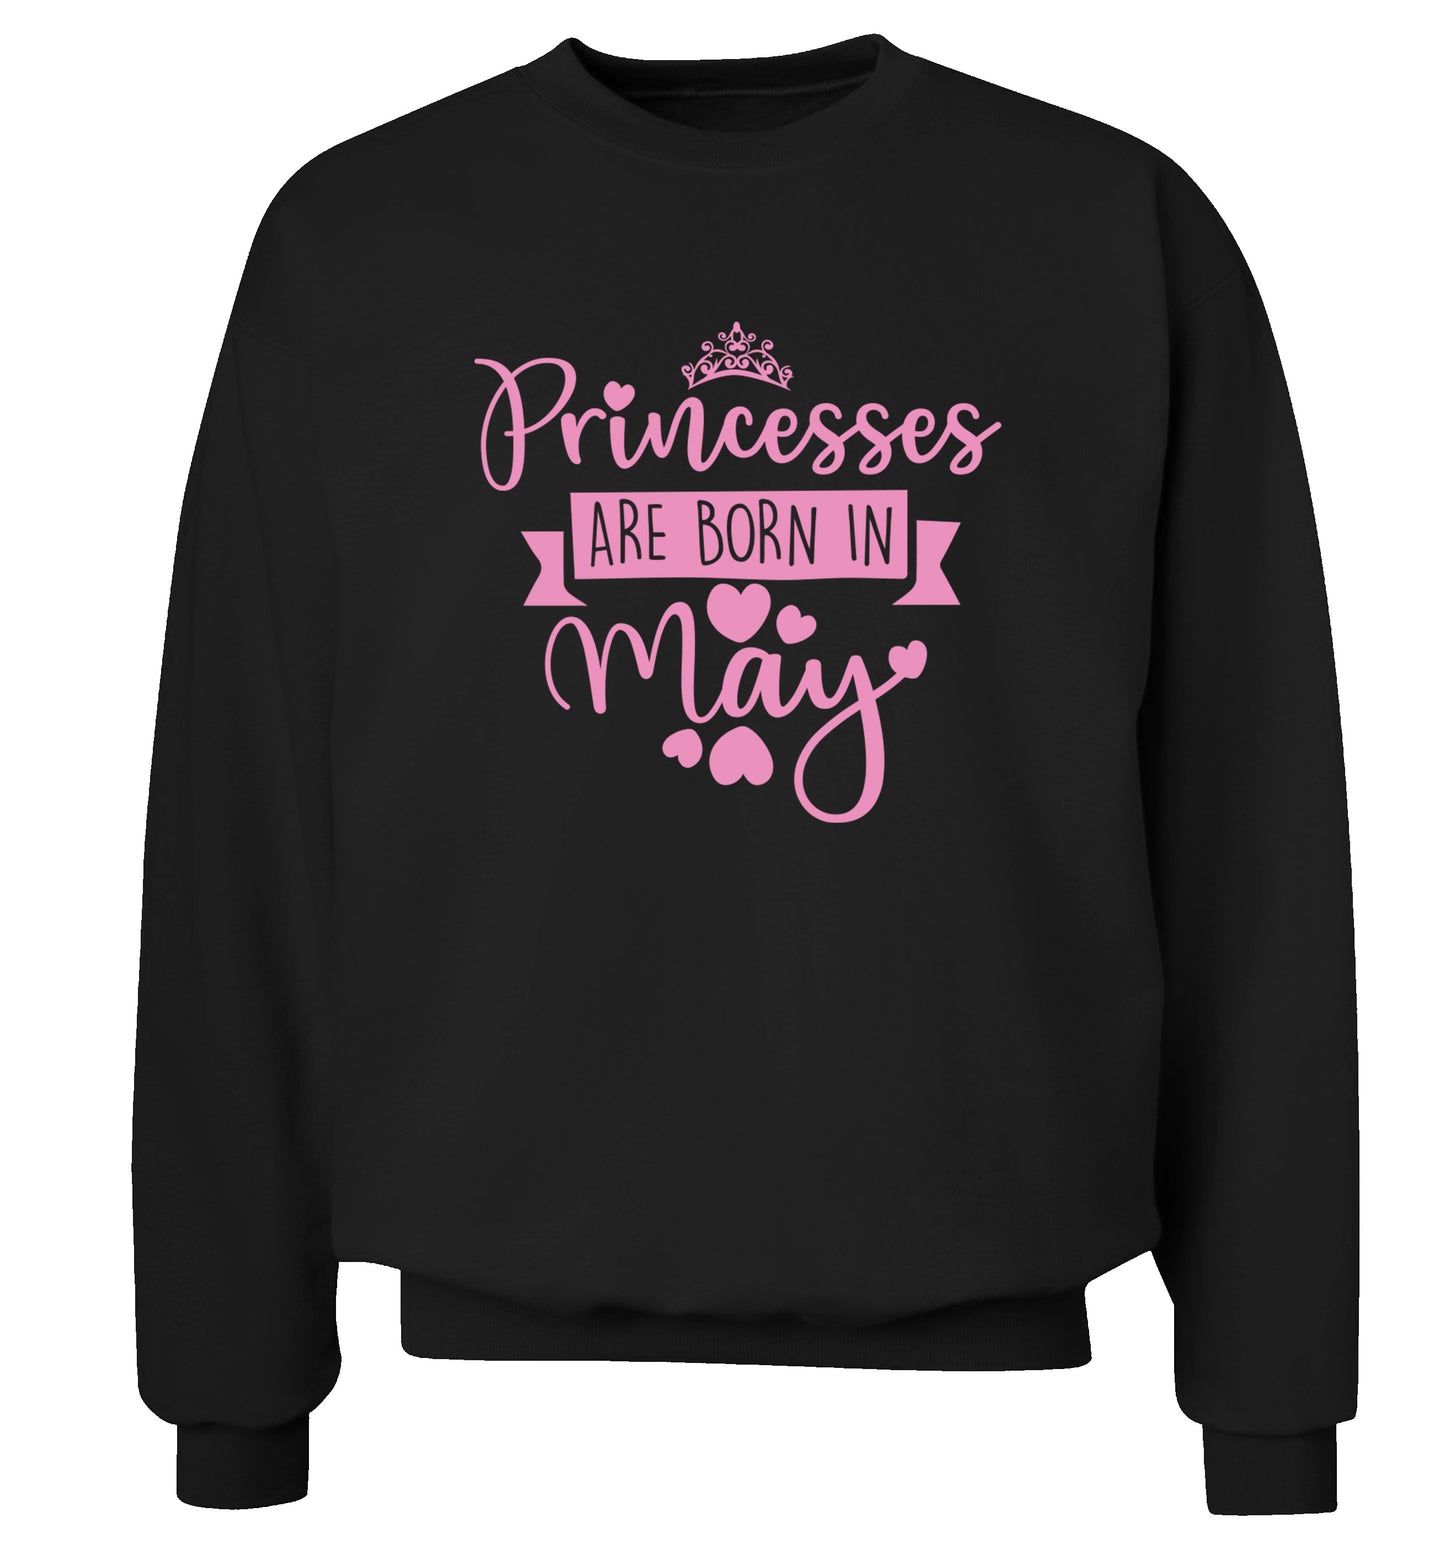 Princesses are born in May Adult's unisex black Sweater 2XL